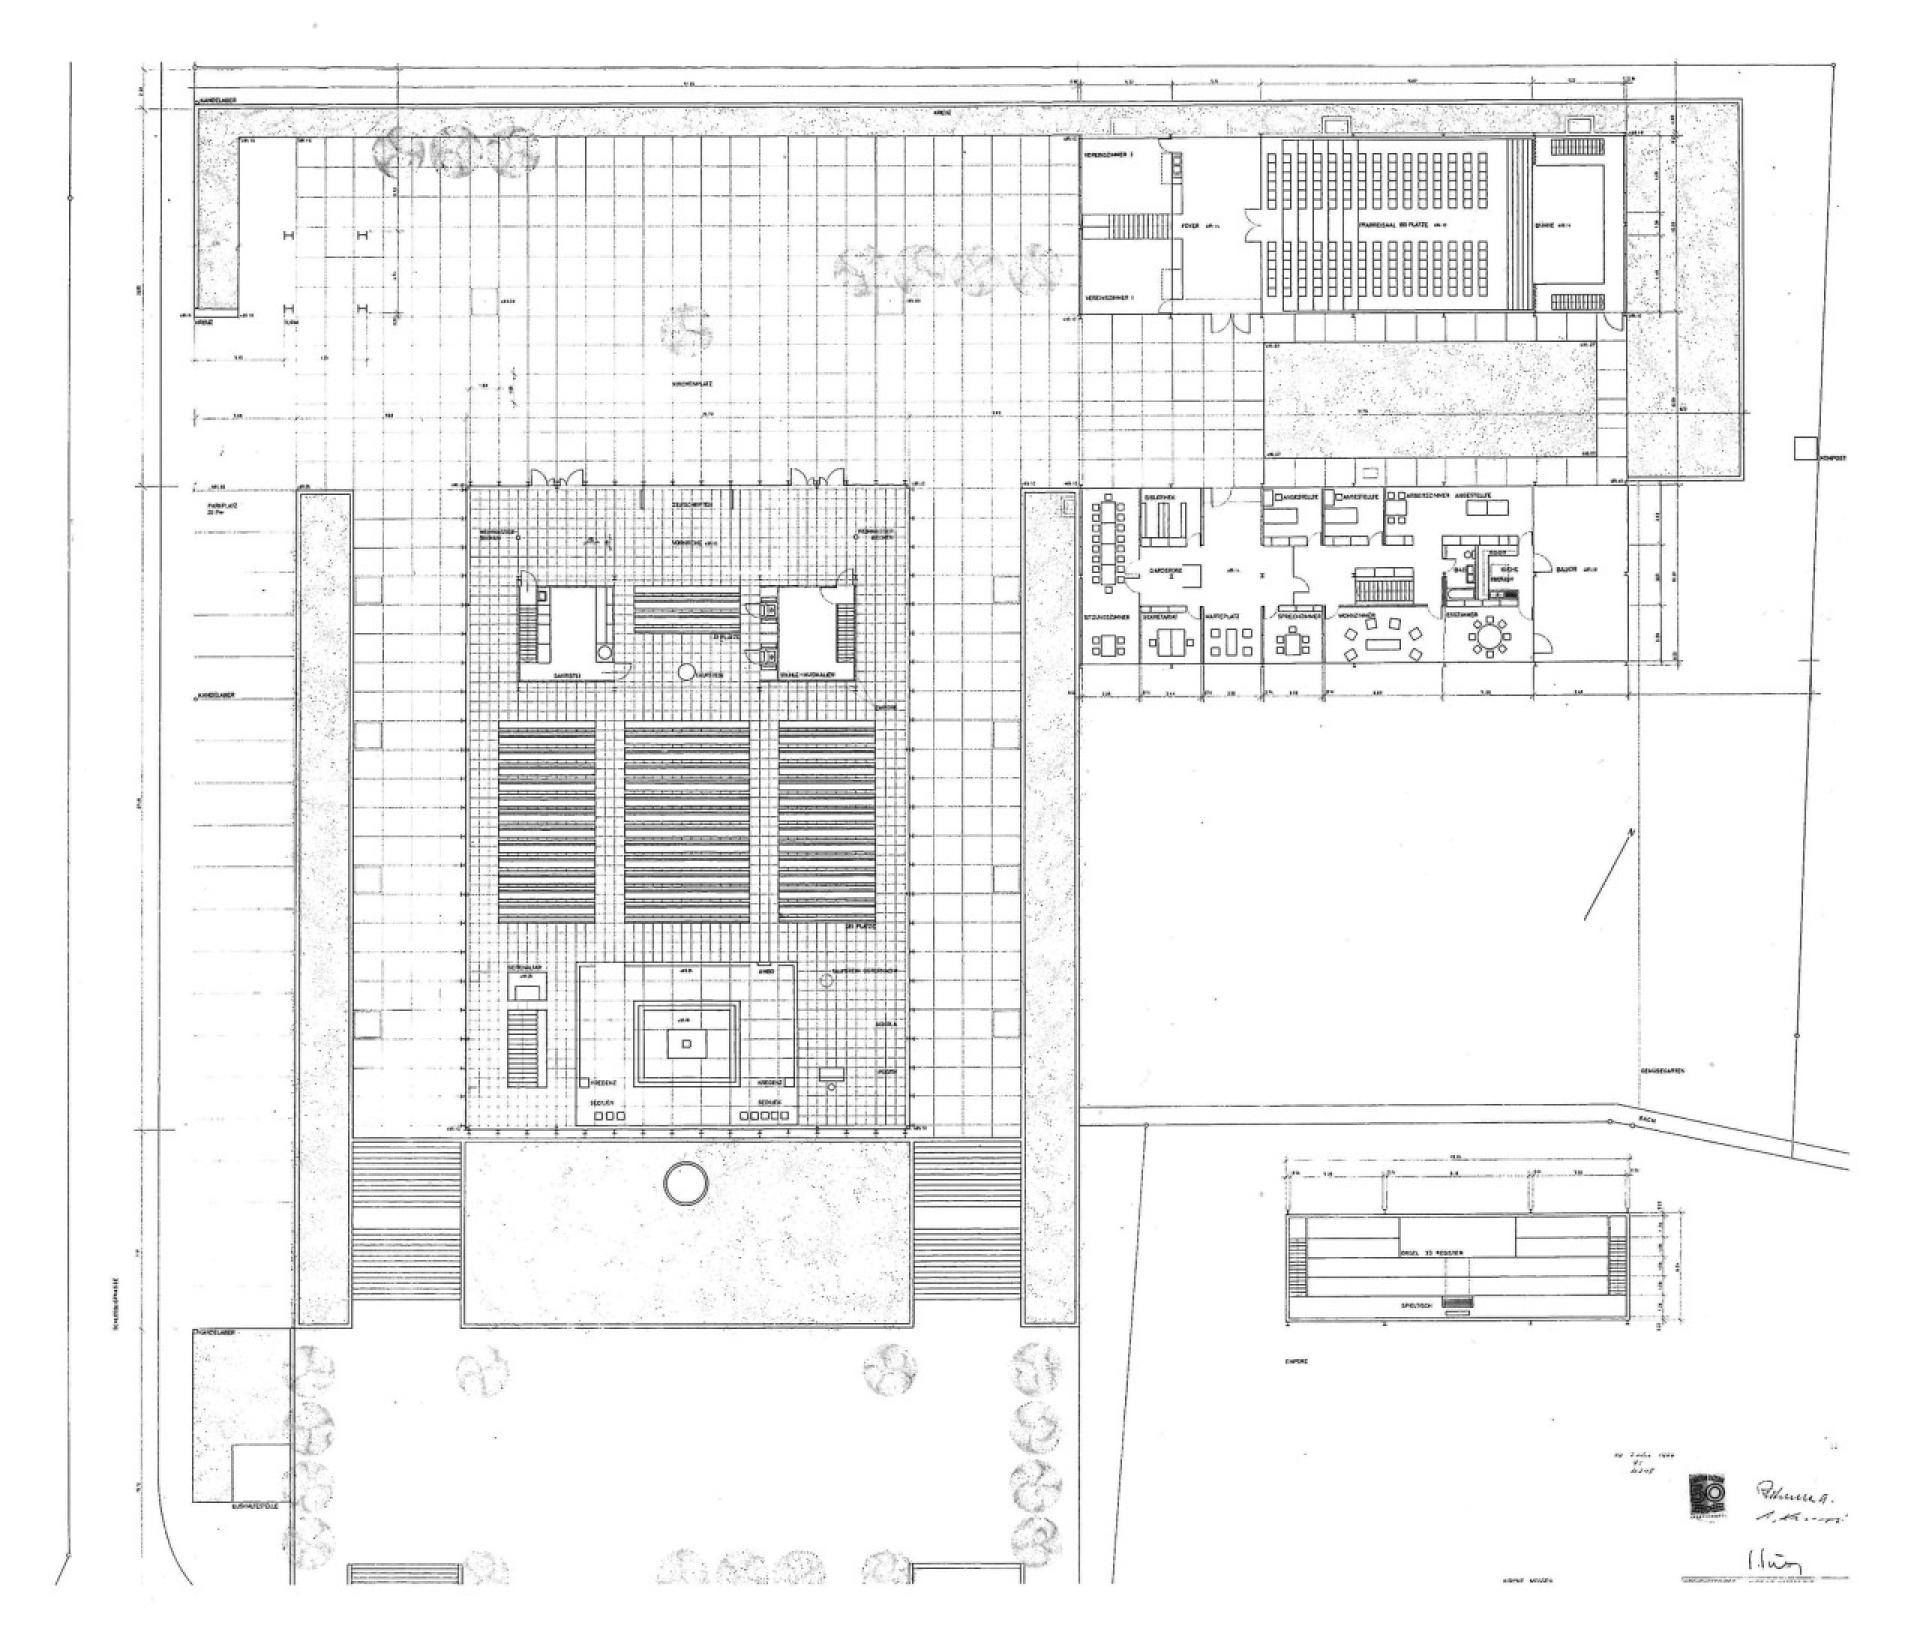 The floor plan of the church and its repetitive grid. | Scanned from: Jürg Graser, Gefüllte Leere, Zürich 2014, p. 217.